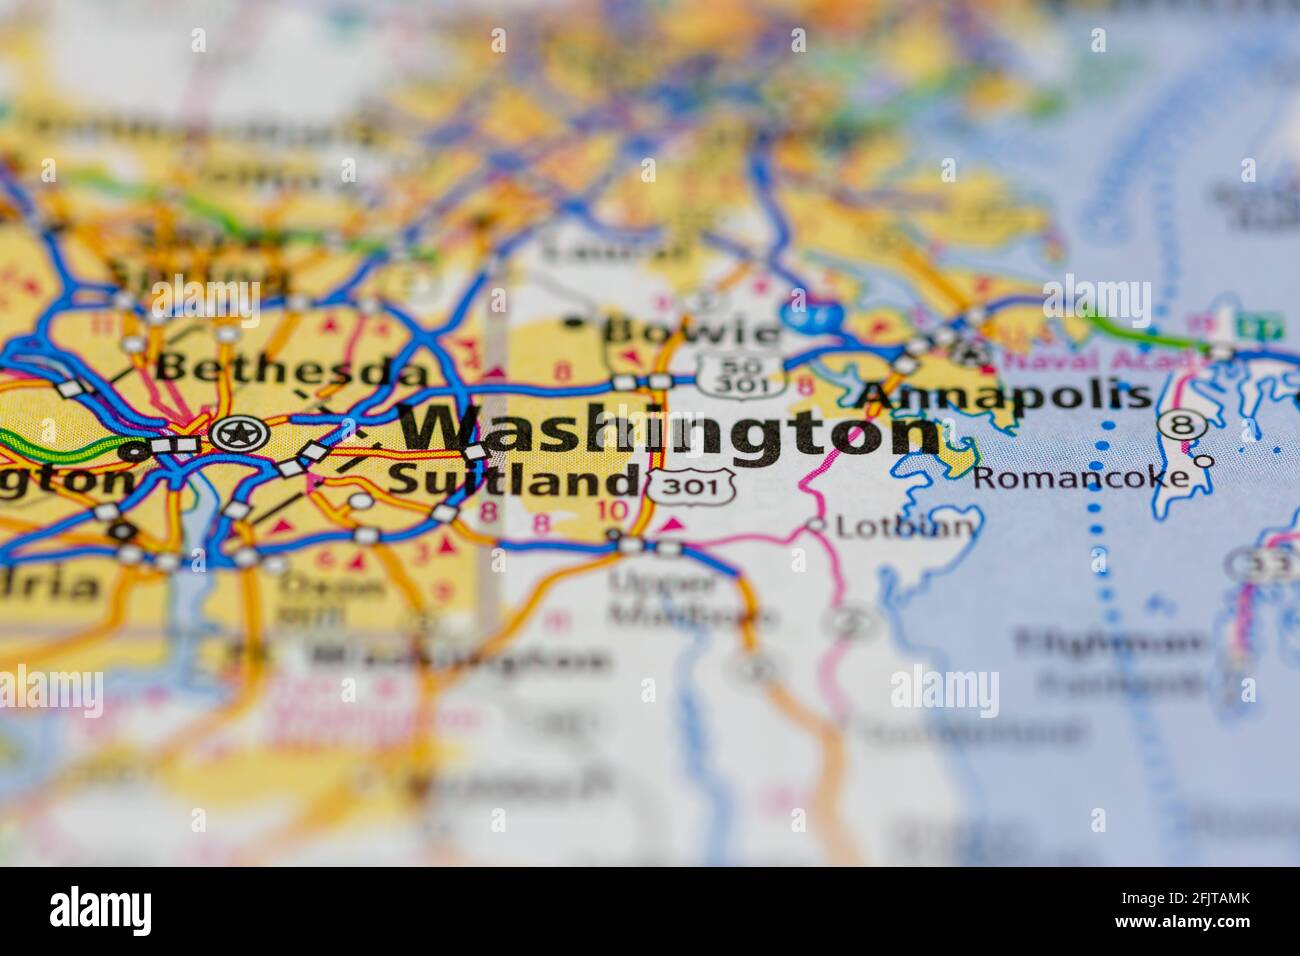 Washington Dc Usa And Surrounding Areas Shown On A Road Map Or Geography Map 2FJTAMK 